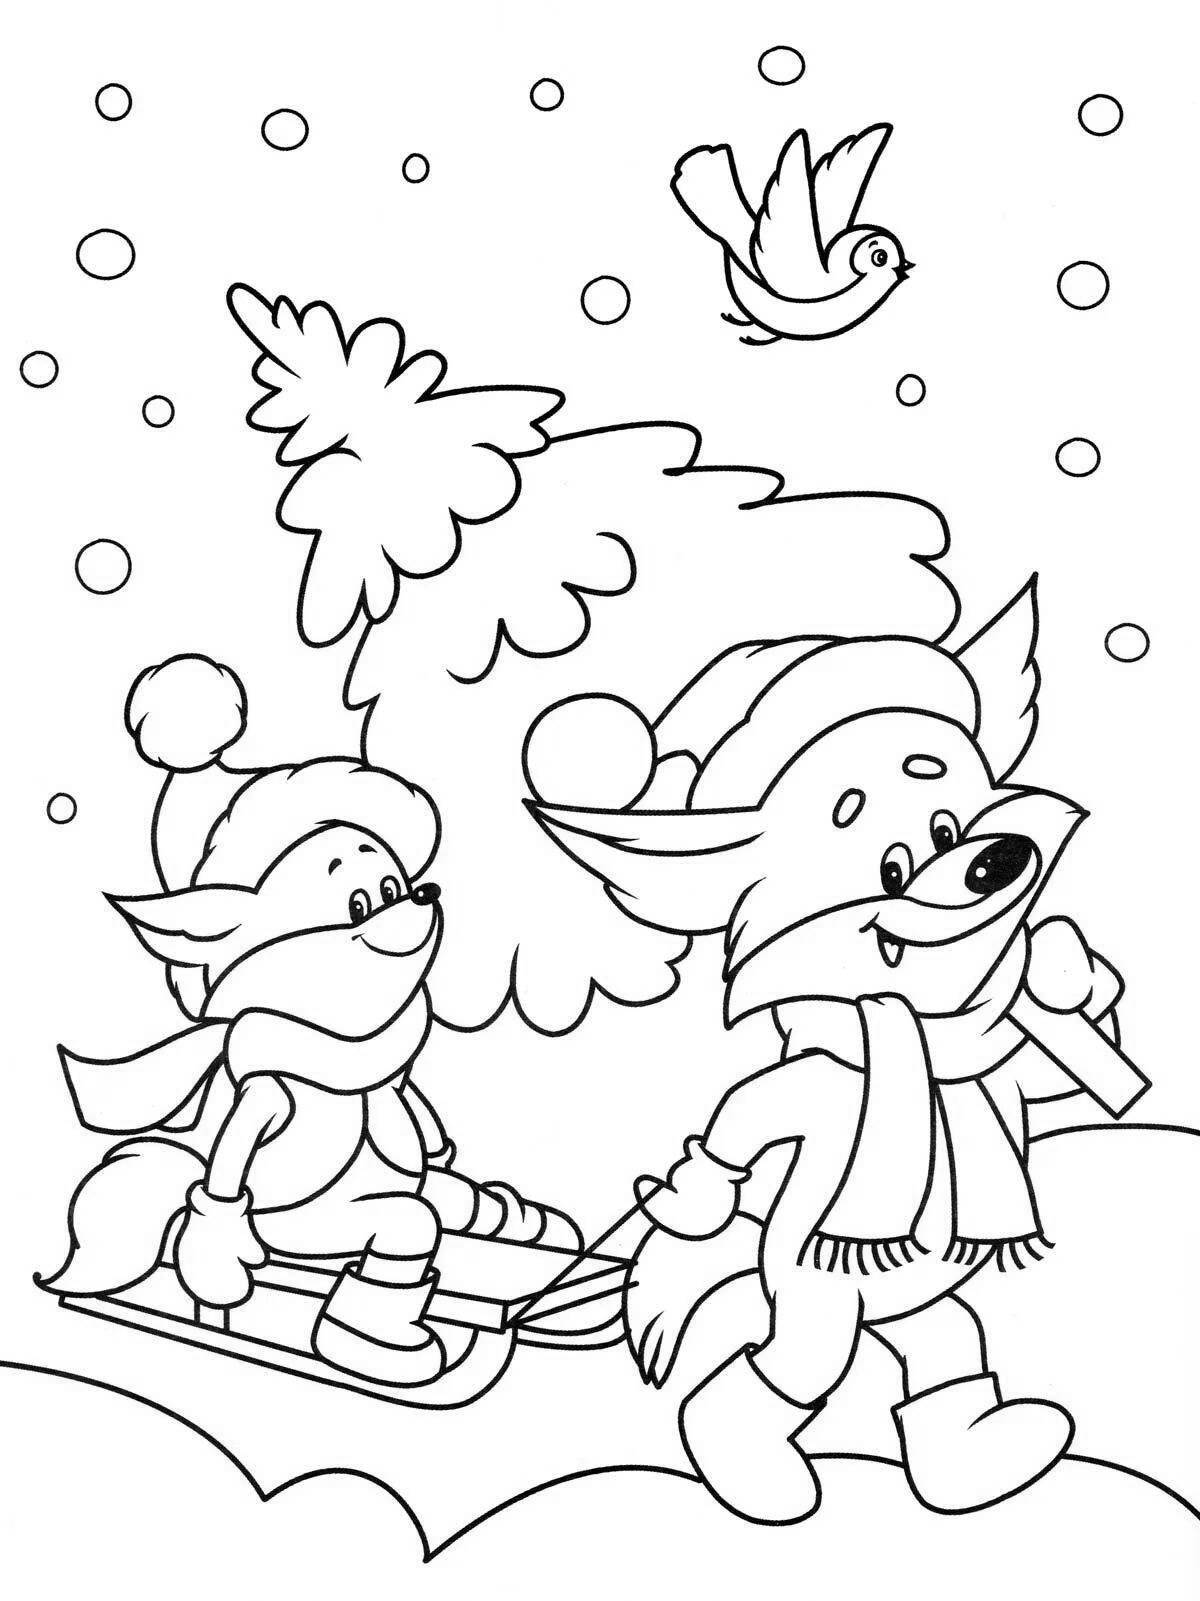 Adorable winter coloring book for kids 6-7 years old